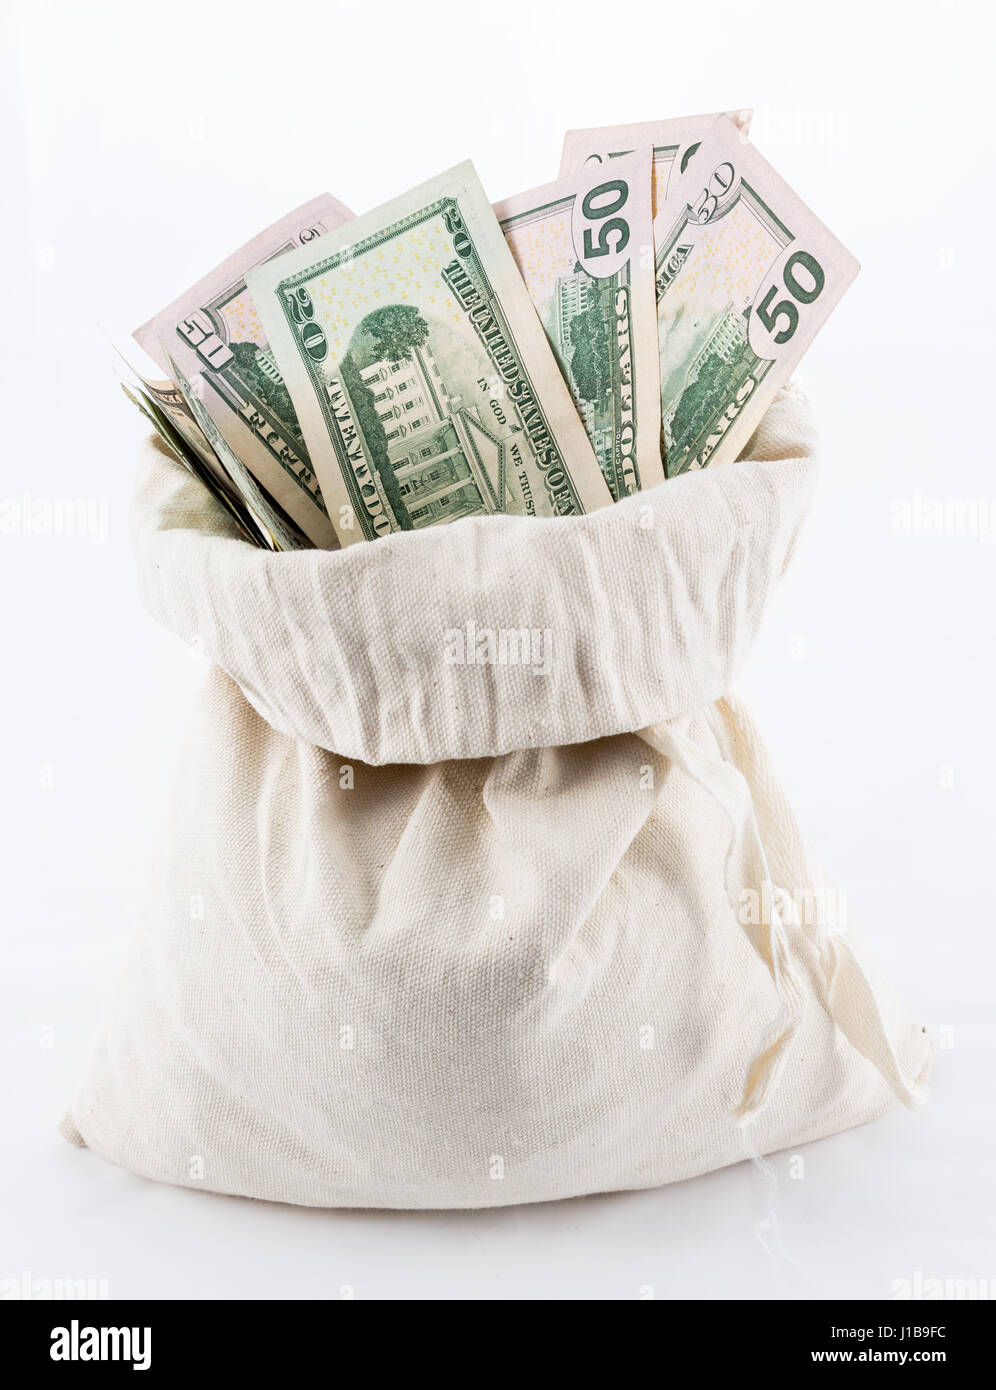 Sack of money - thousands of US dollars / dollar bill notes in a money bag on a white background Stock Photo